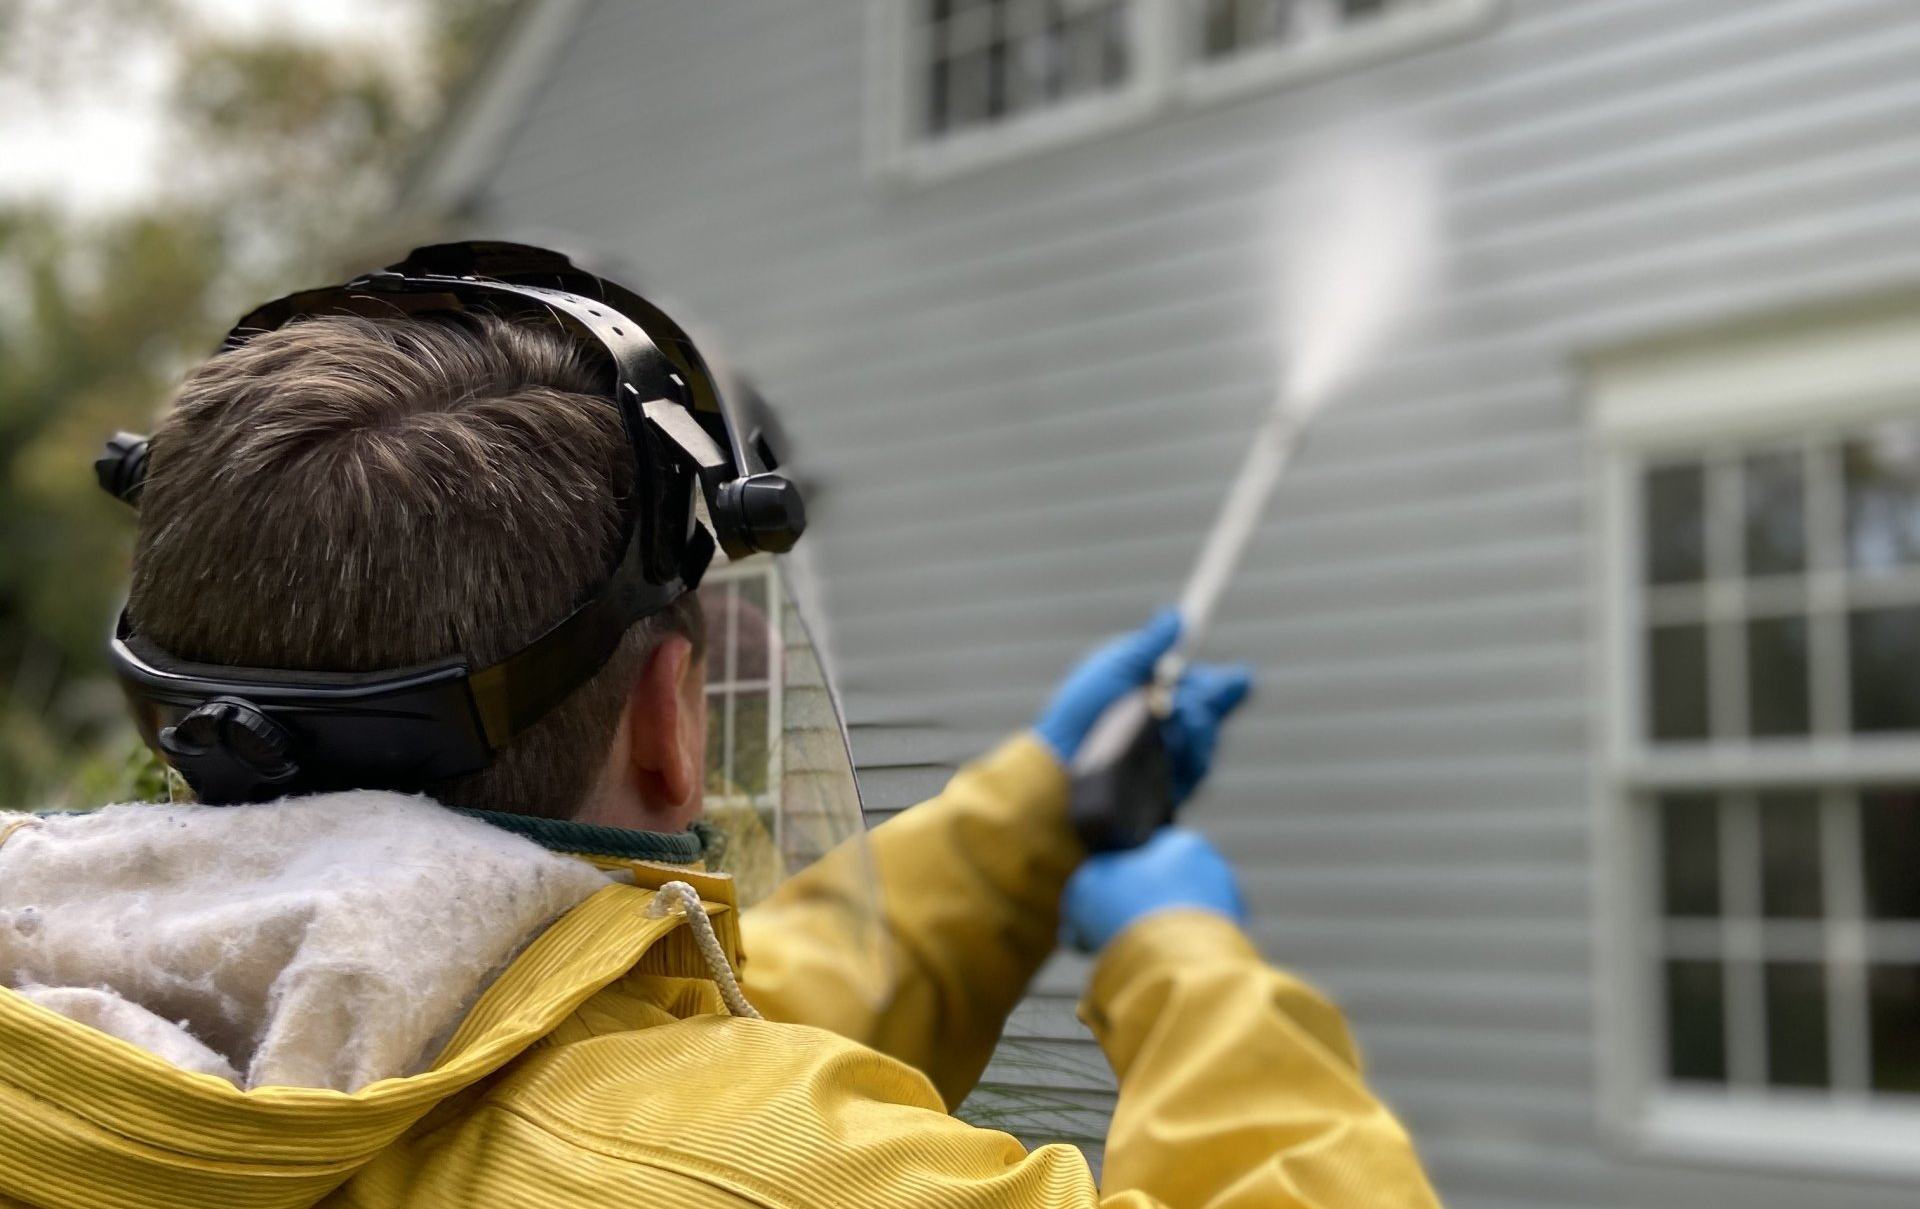 Man wearing PPE and power washing the vinyl siding of a home